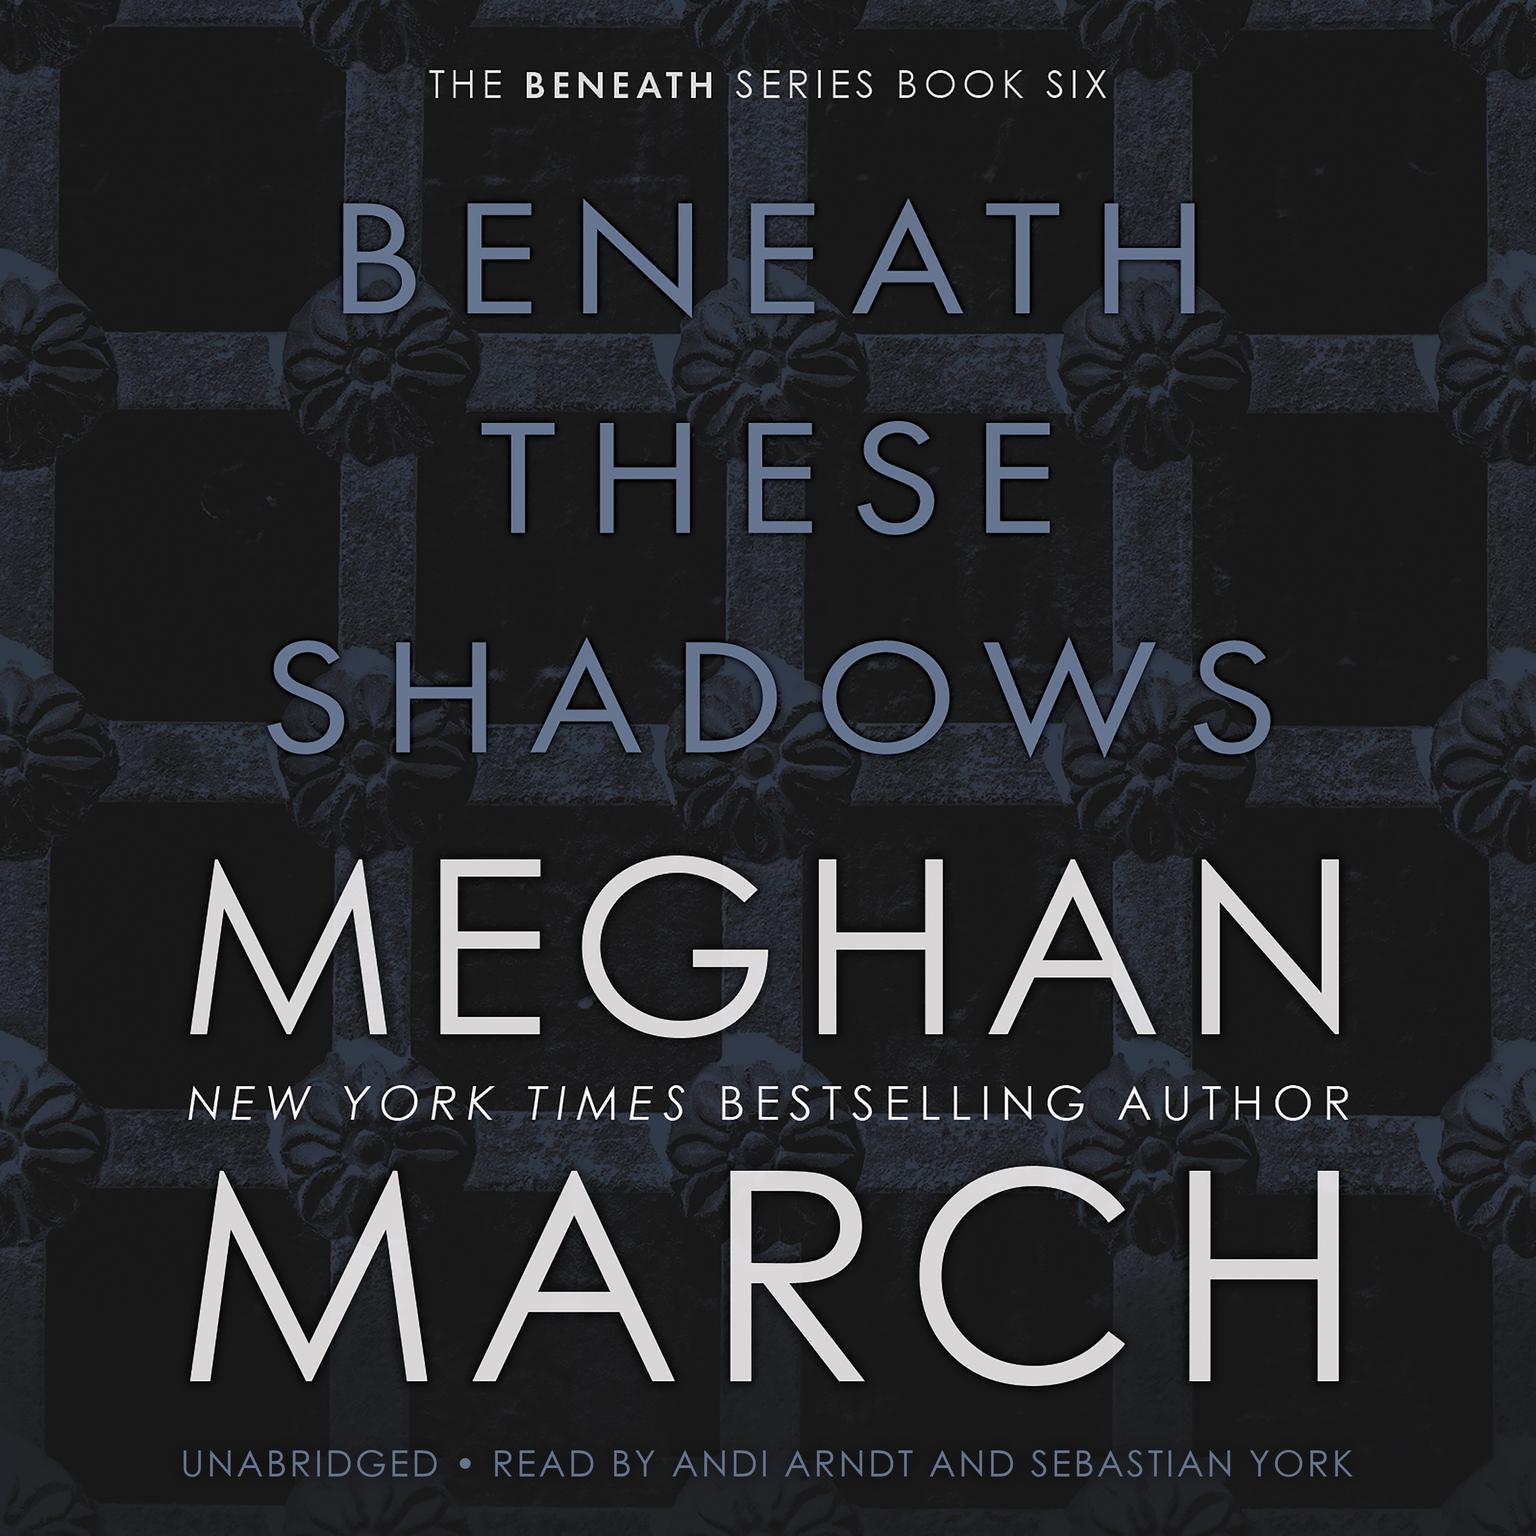 Beneath These Shadows Audiobook, by Meghan March